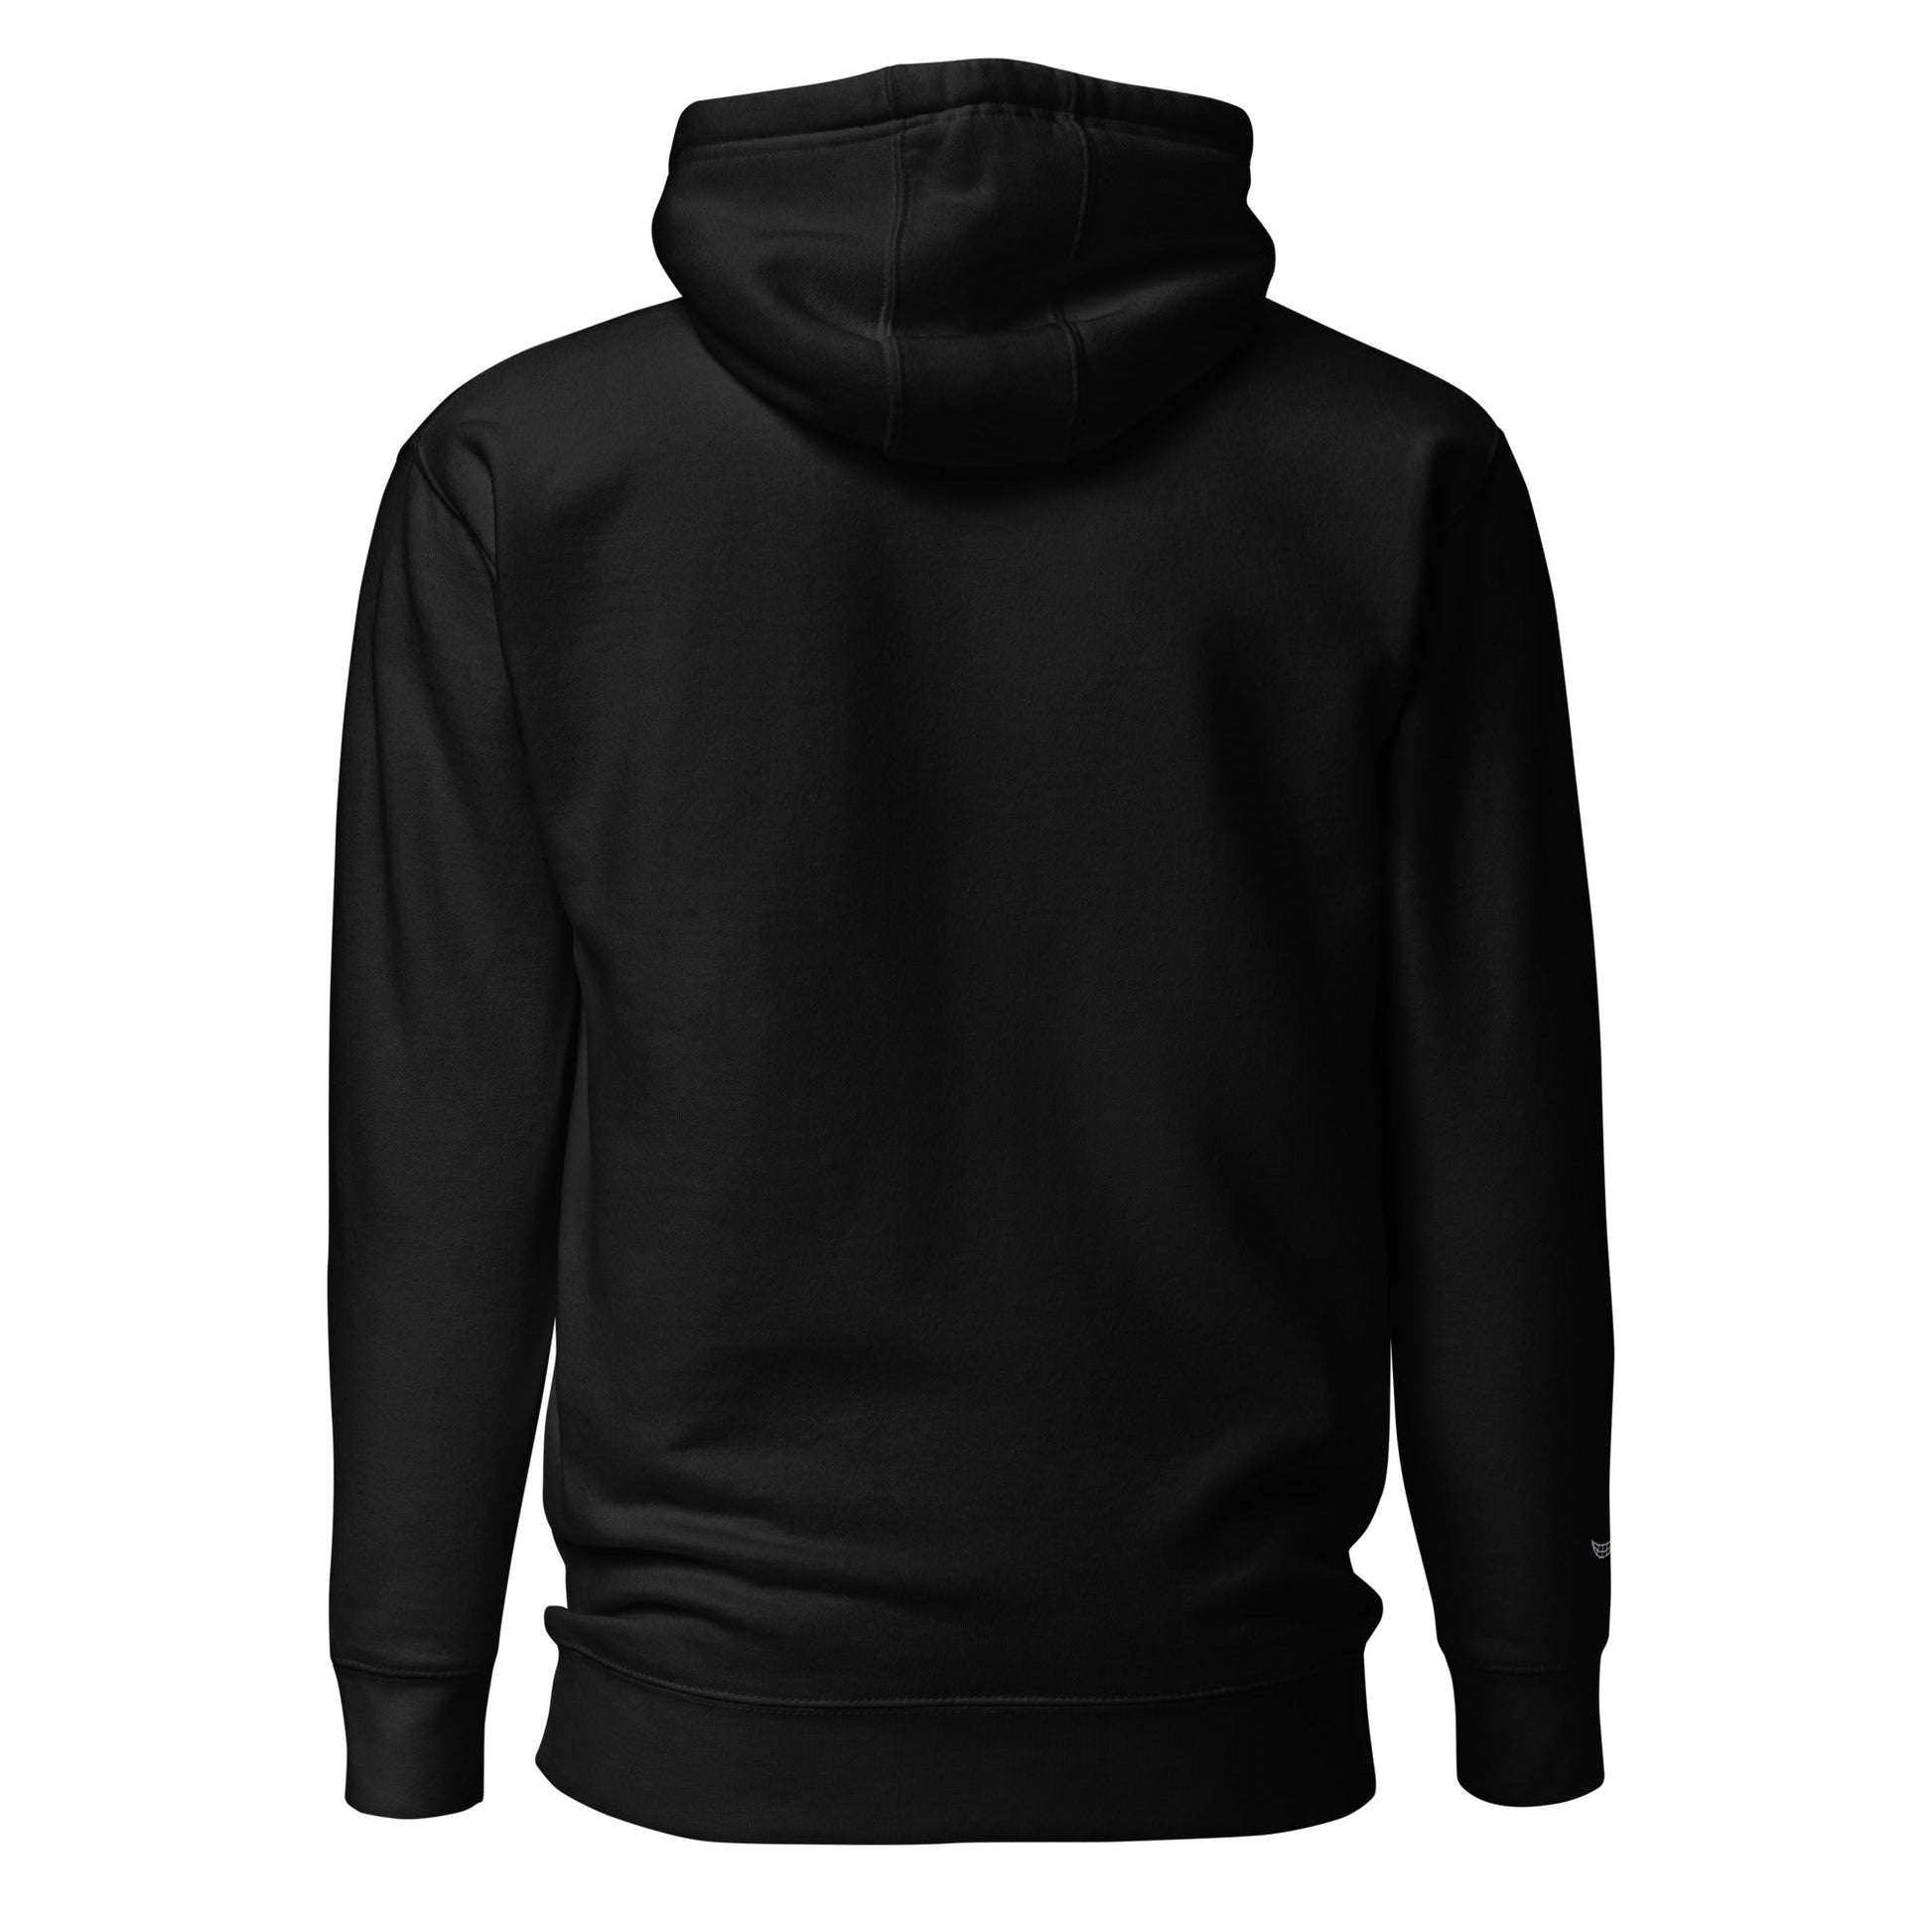 Me Love Pixelizations Embroidered Unisex Hoodie - chucklecouture co.